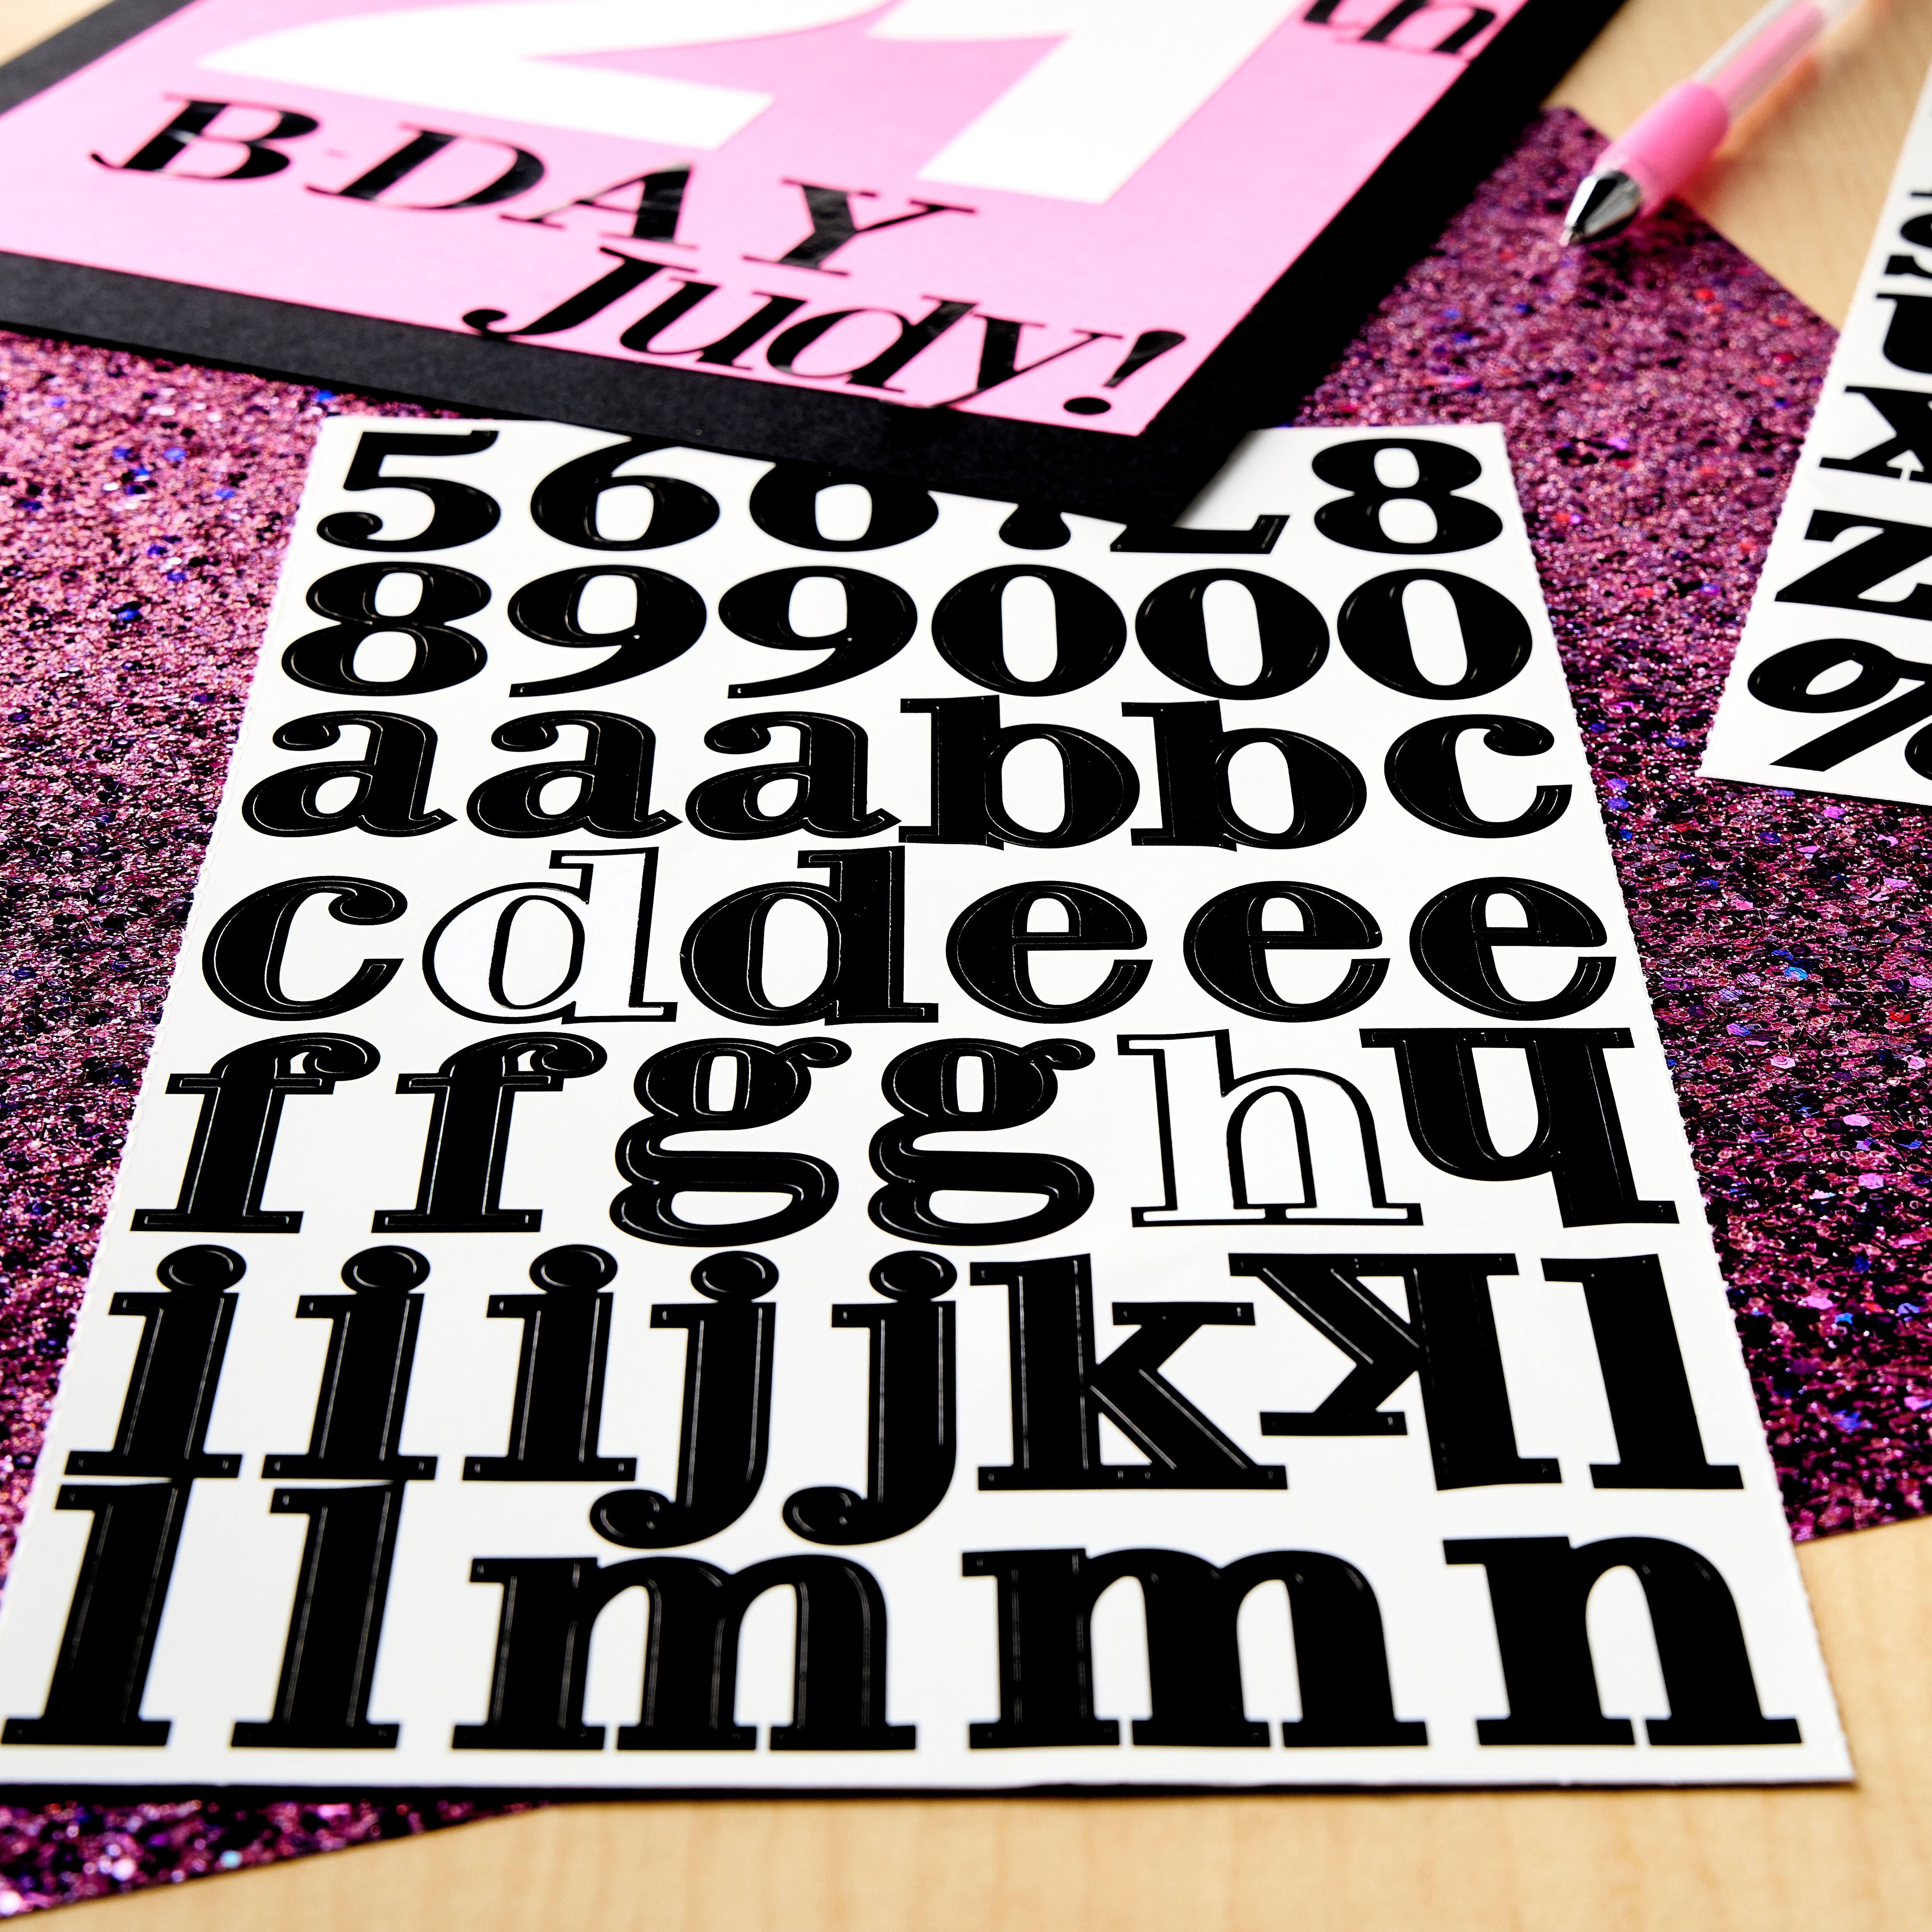 12 Packs: 2 Ct. (24 Total) Black Mini Font Alphabet and Number Stickers by Recollections, Size: 3.75” x 10.25”